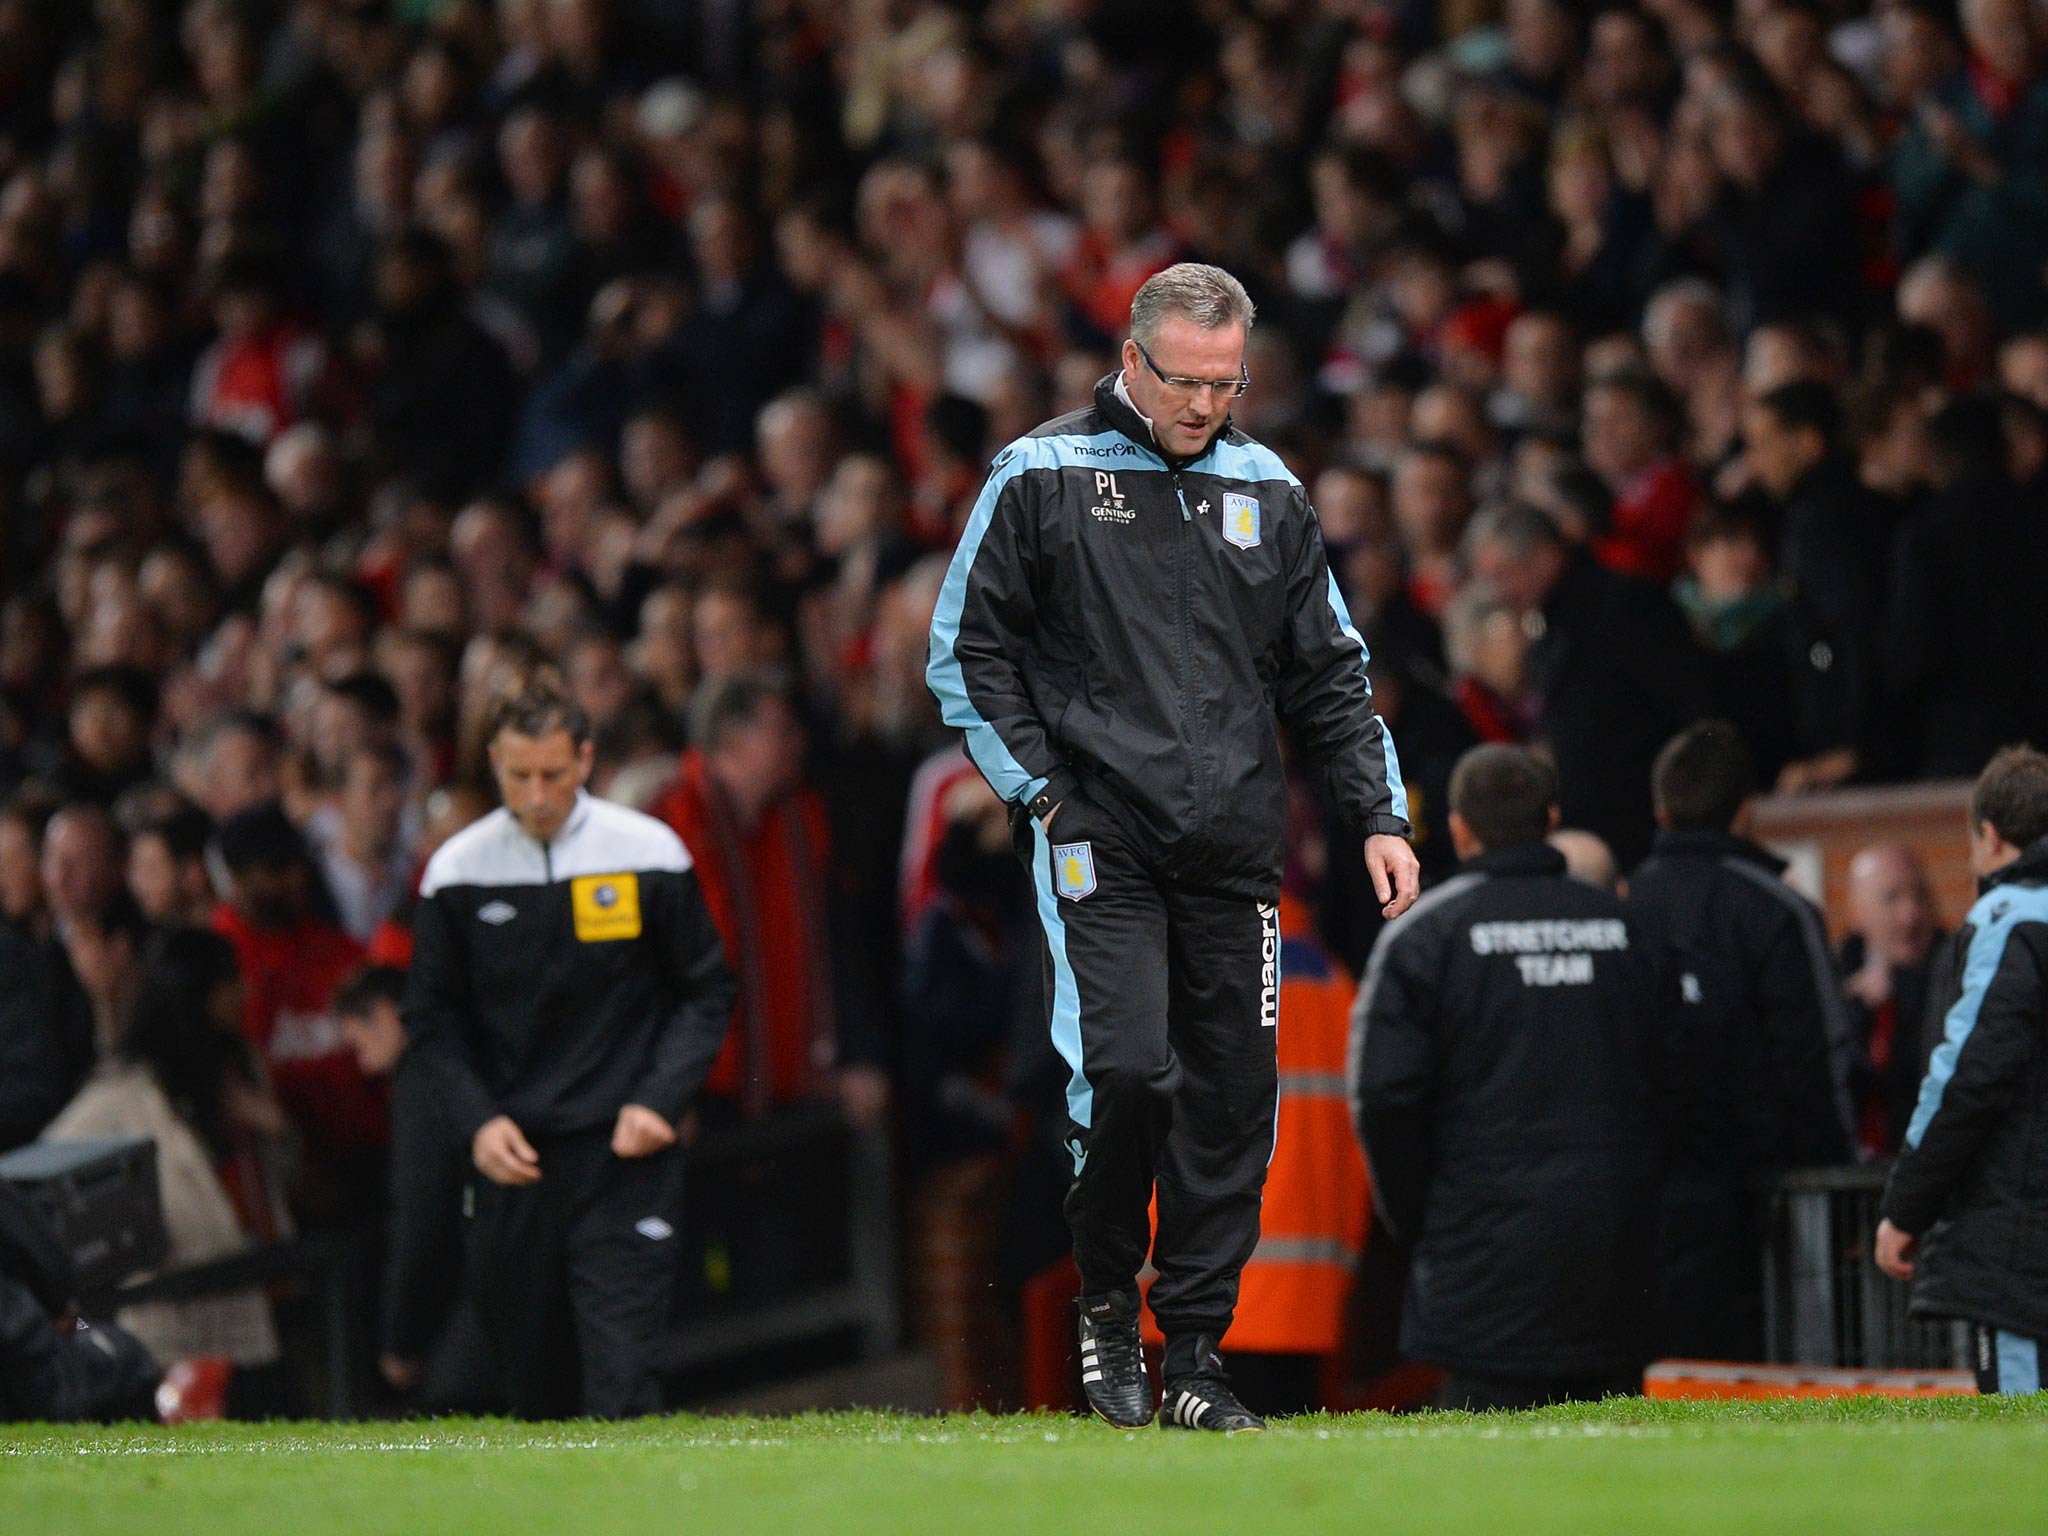 Aston Villa manager Paul Lambert pictured at Old Trafford